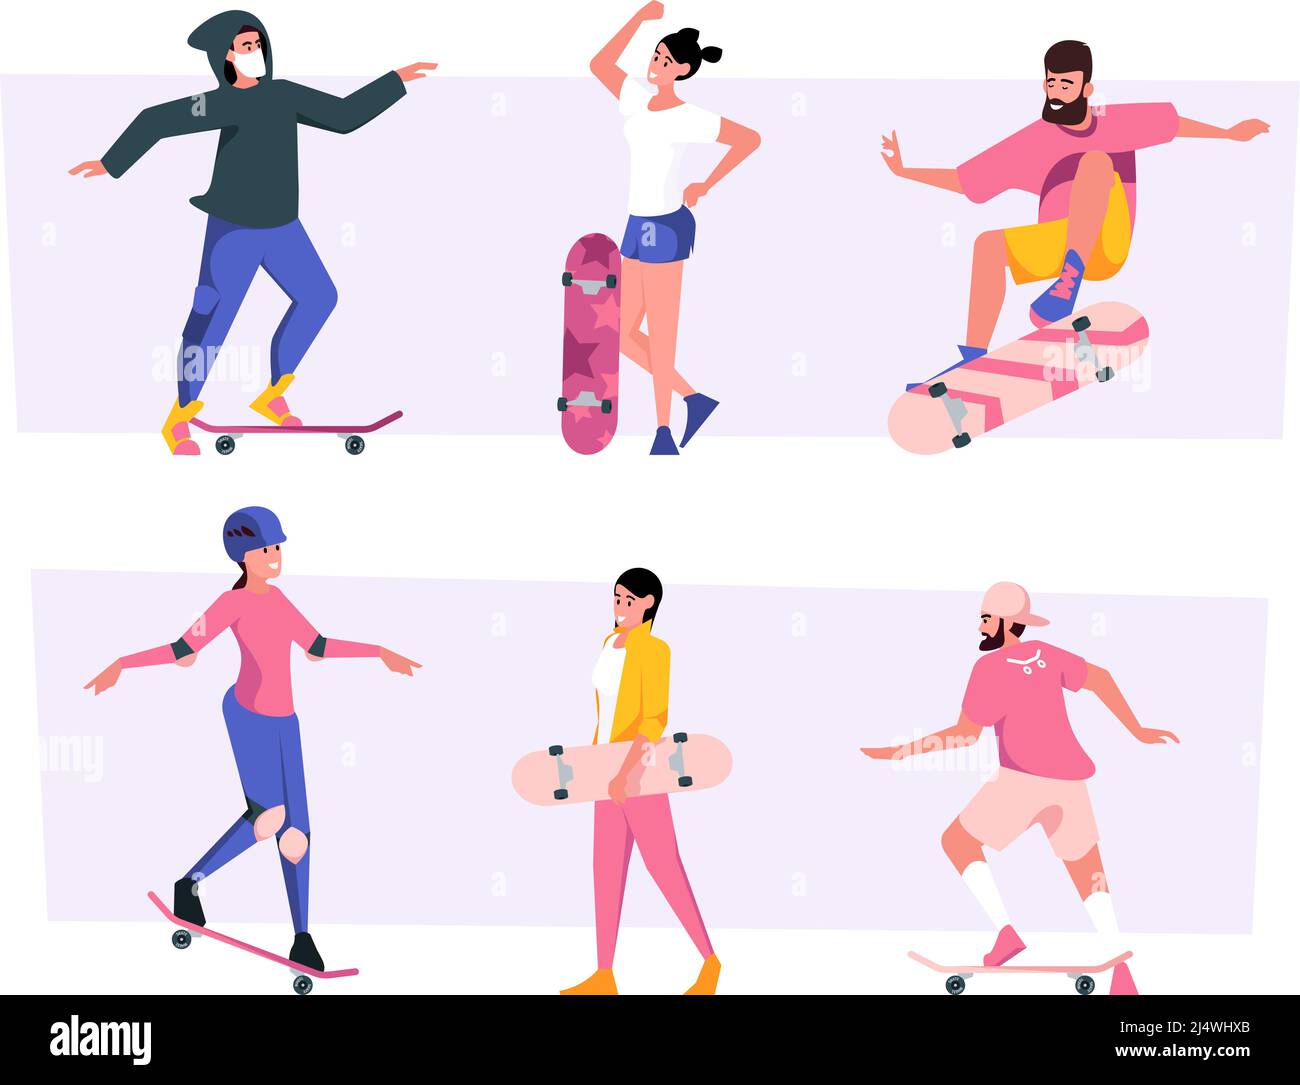 Skateboarding. Teenagers sport people riding on skates and rollers active persons in action poses on longboards garish vector flat illustrations Stock Vector